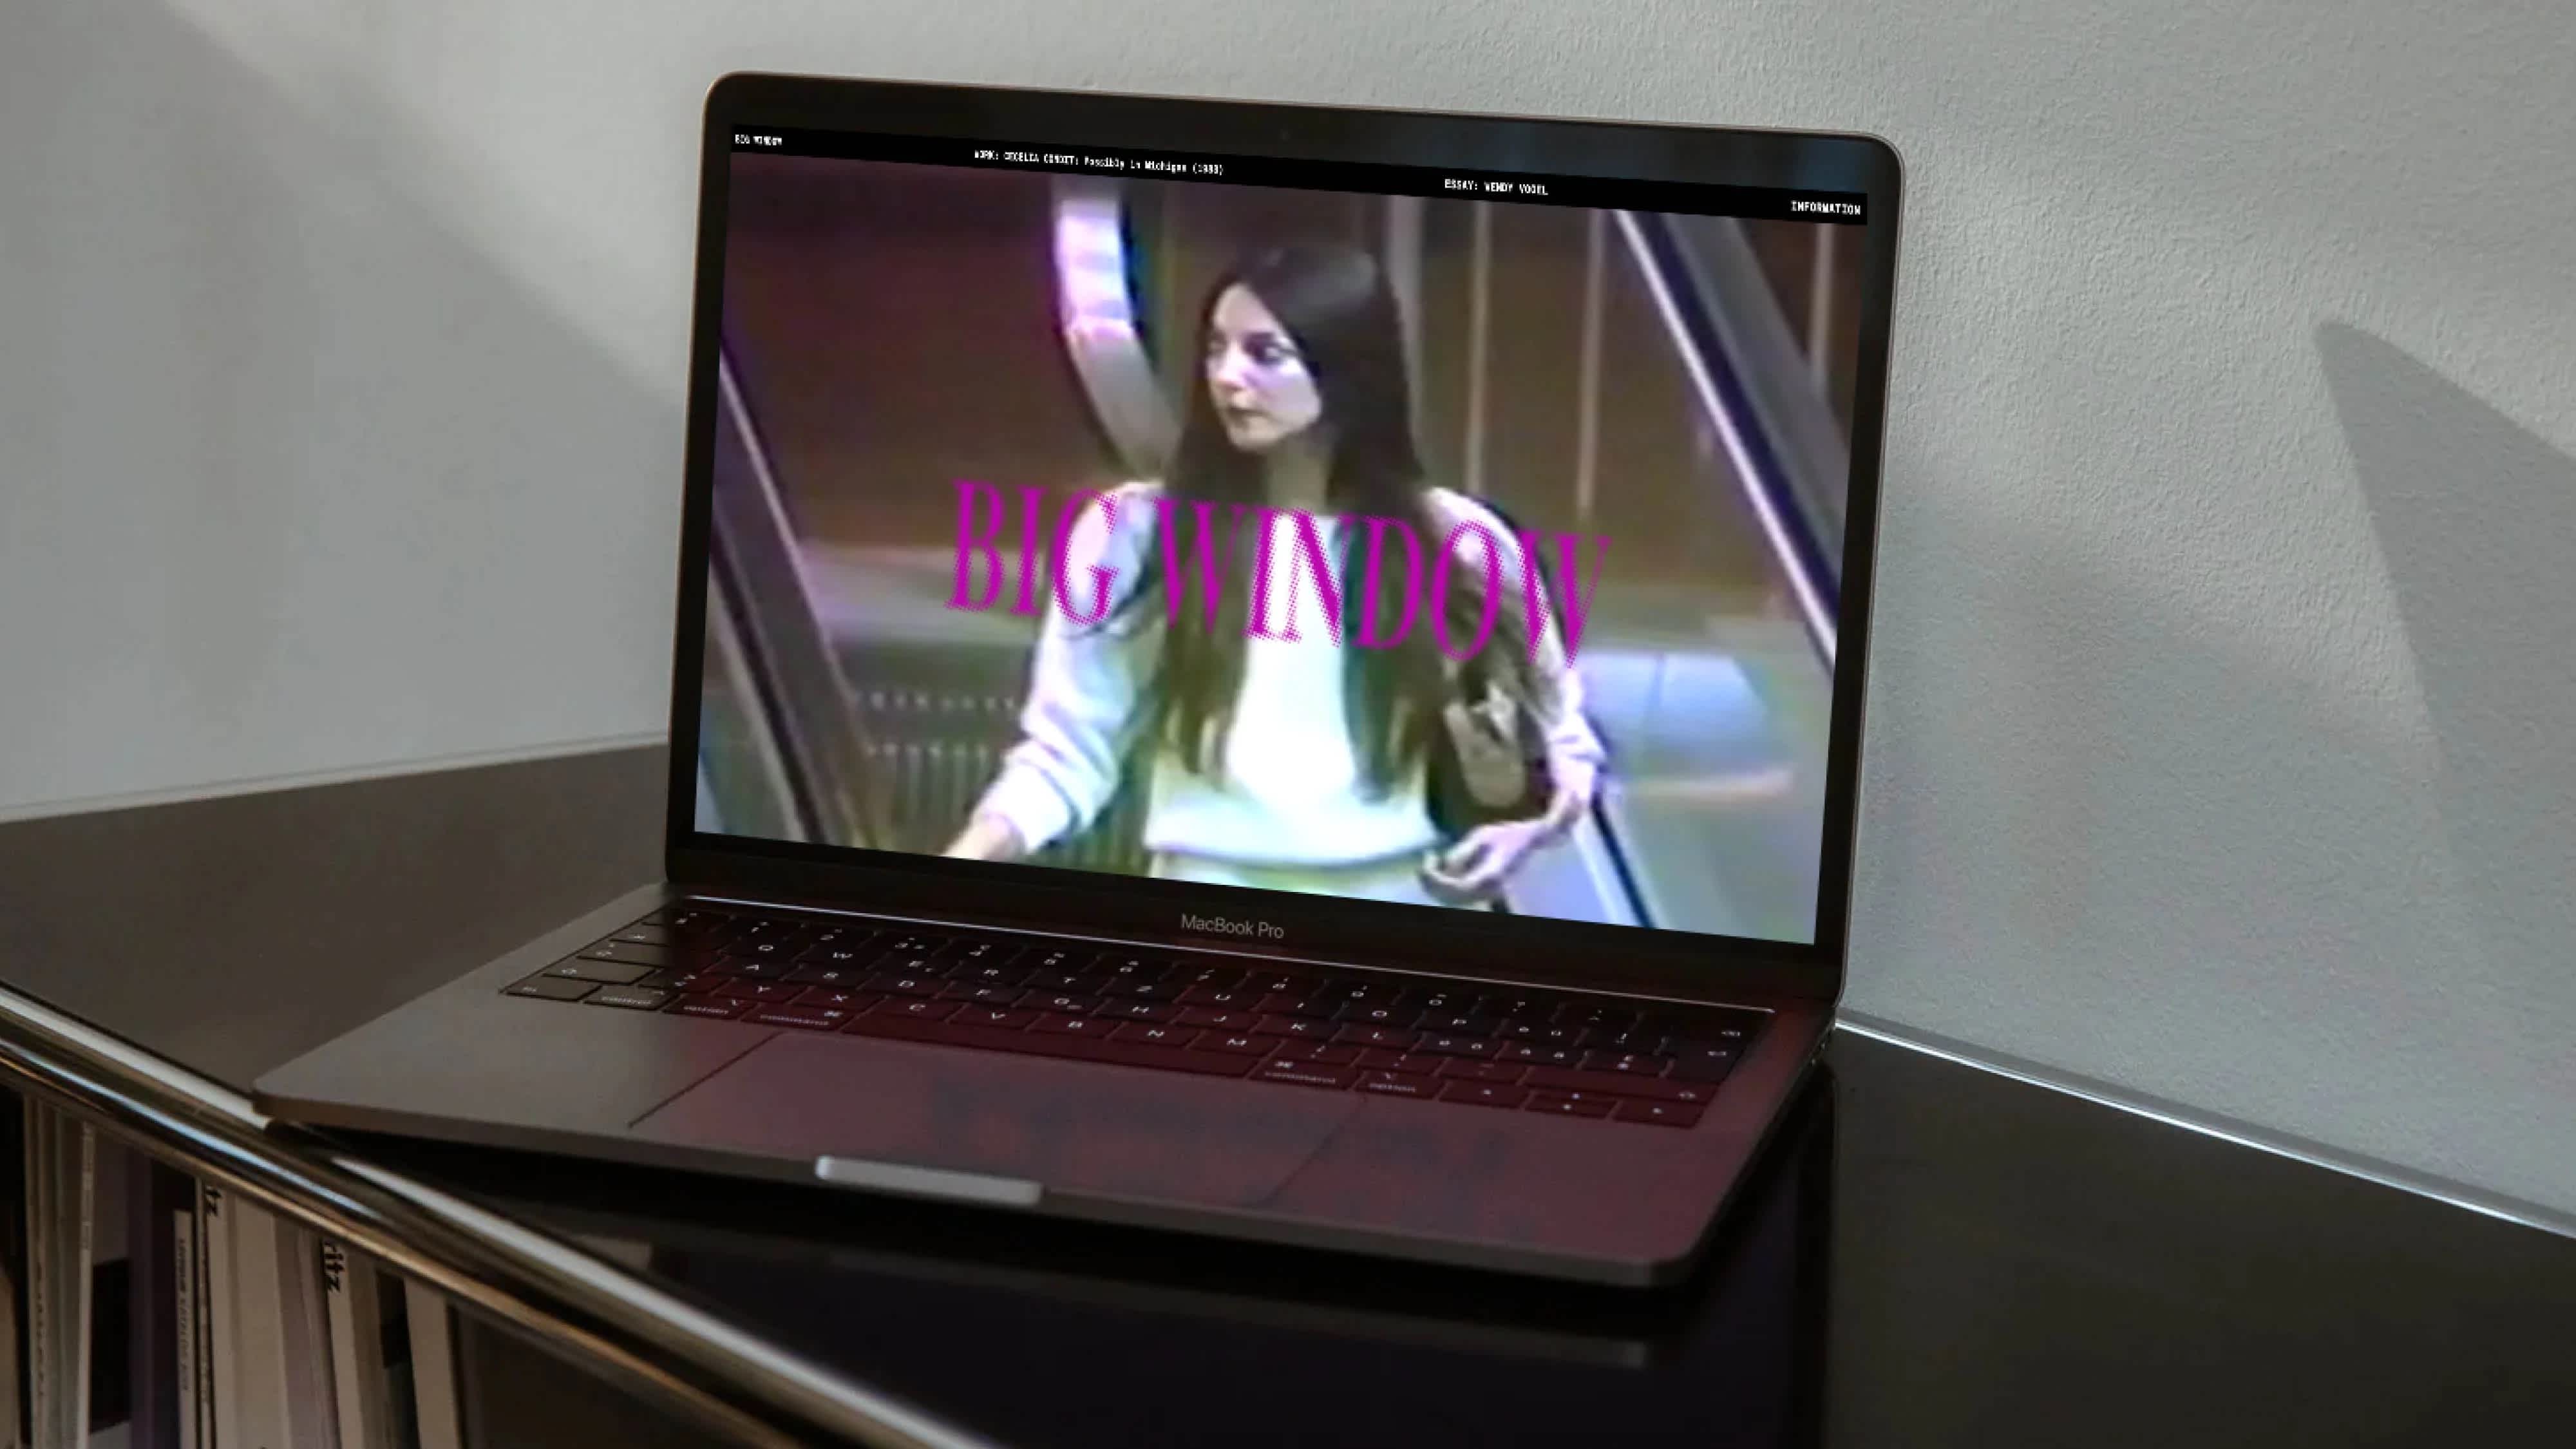 A laptop rests on top of a black bookshelf. The screen features a woman going down an escalator. The title "Big Window" stretches across the screen in magenta, serif letters.